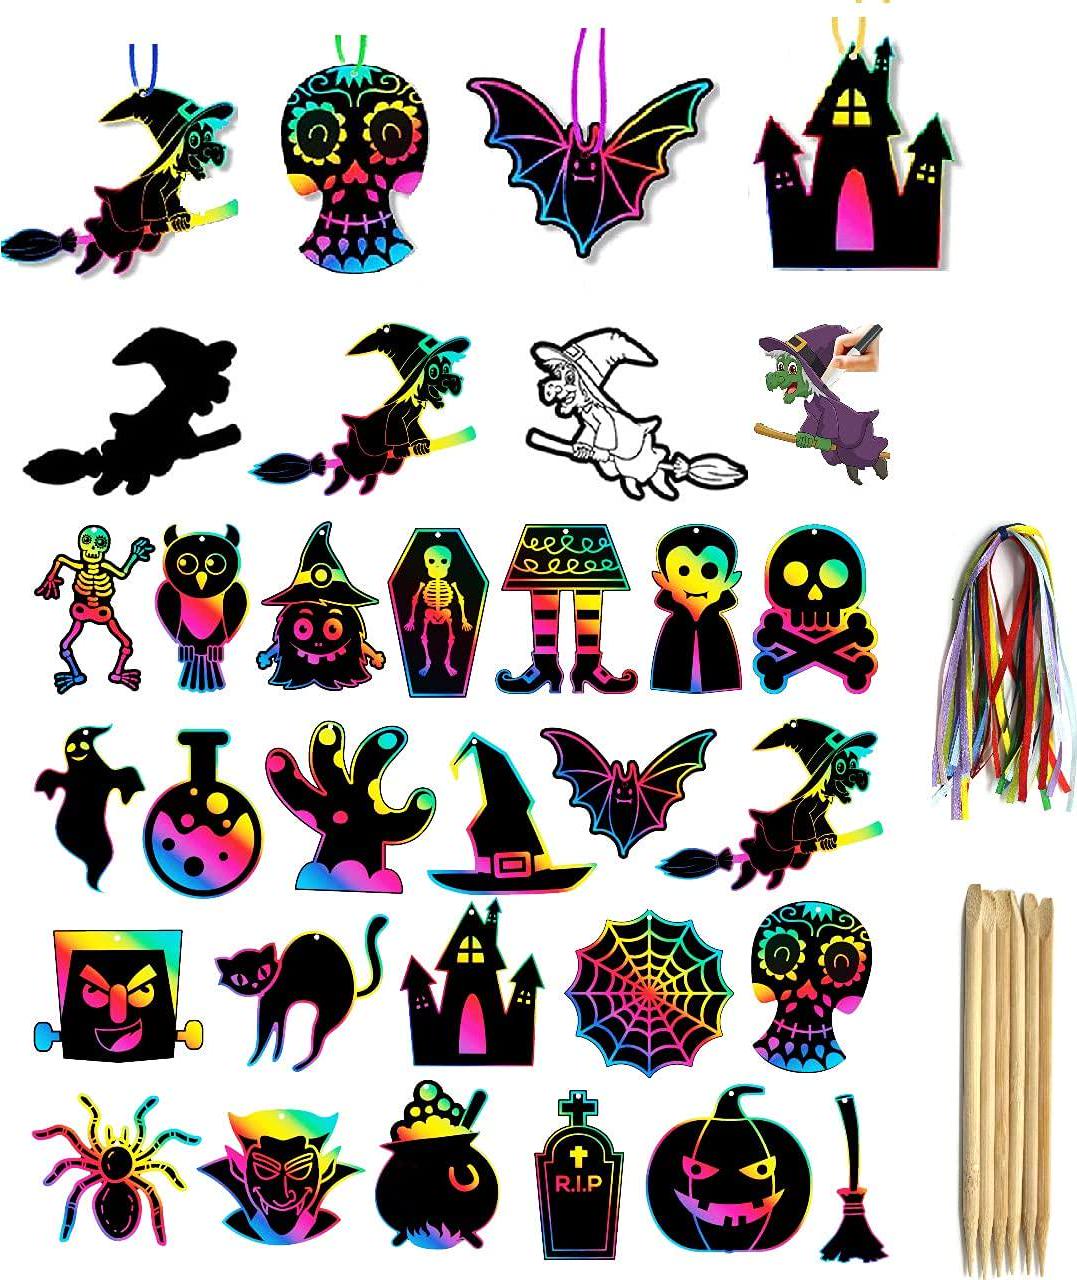 wakestar, Rainbow Scratch Paper halloween Set for Kids Boys Girls Age 4-8,12 Different Shape for Kids Drawing Activity,Arts and Crafts Supplies Kit for Halloween Party Favors Gifts Classroom Prizes